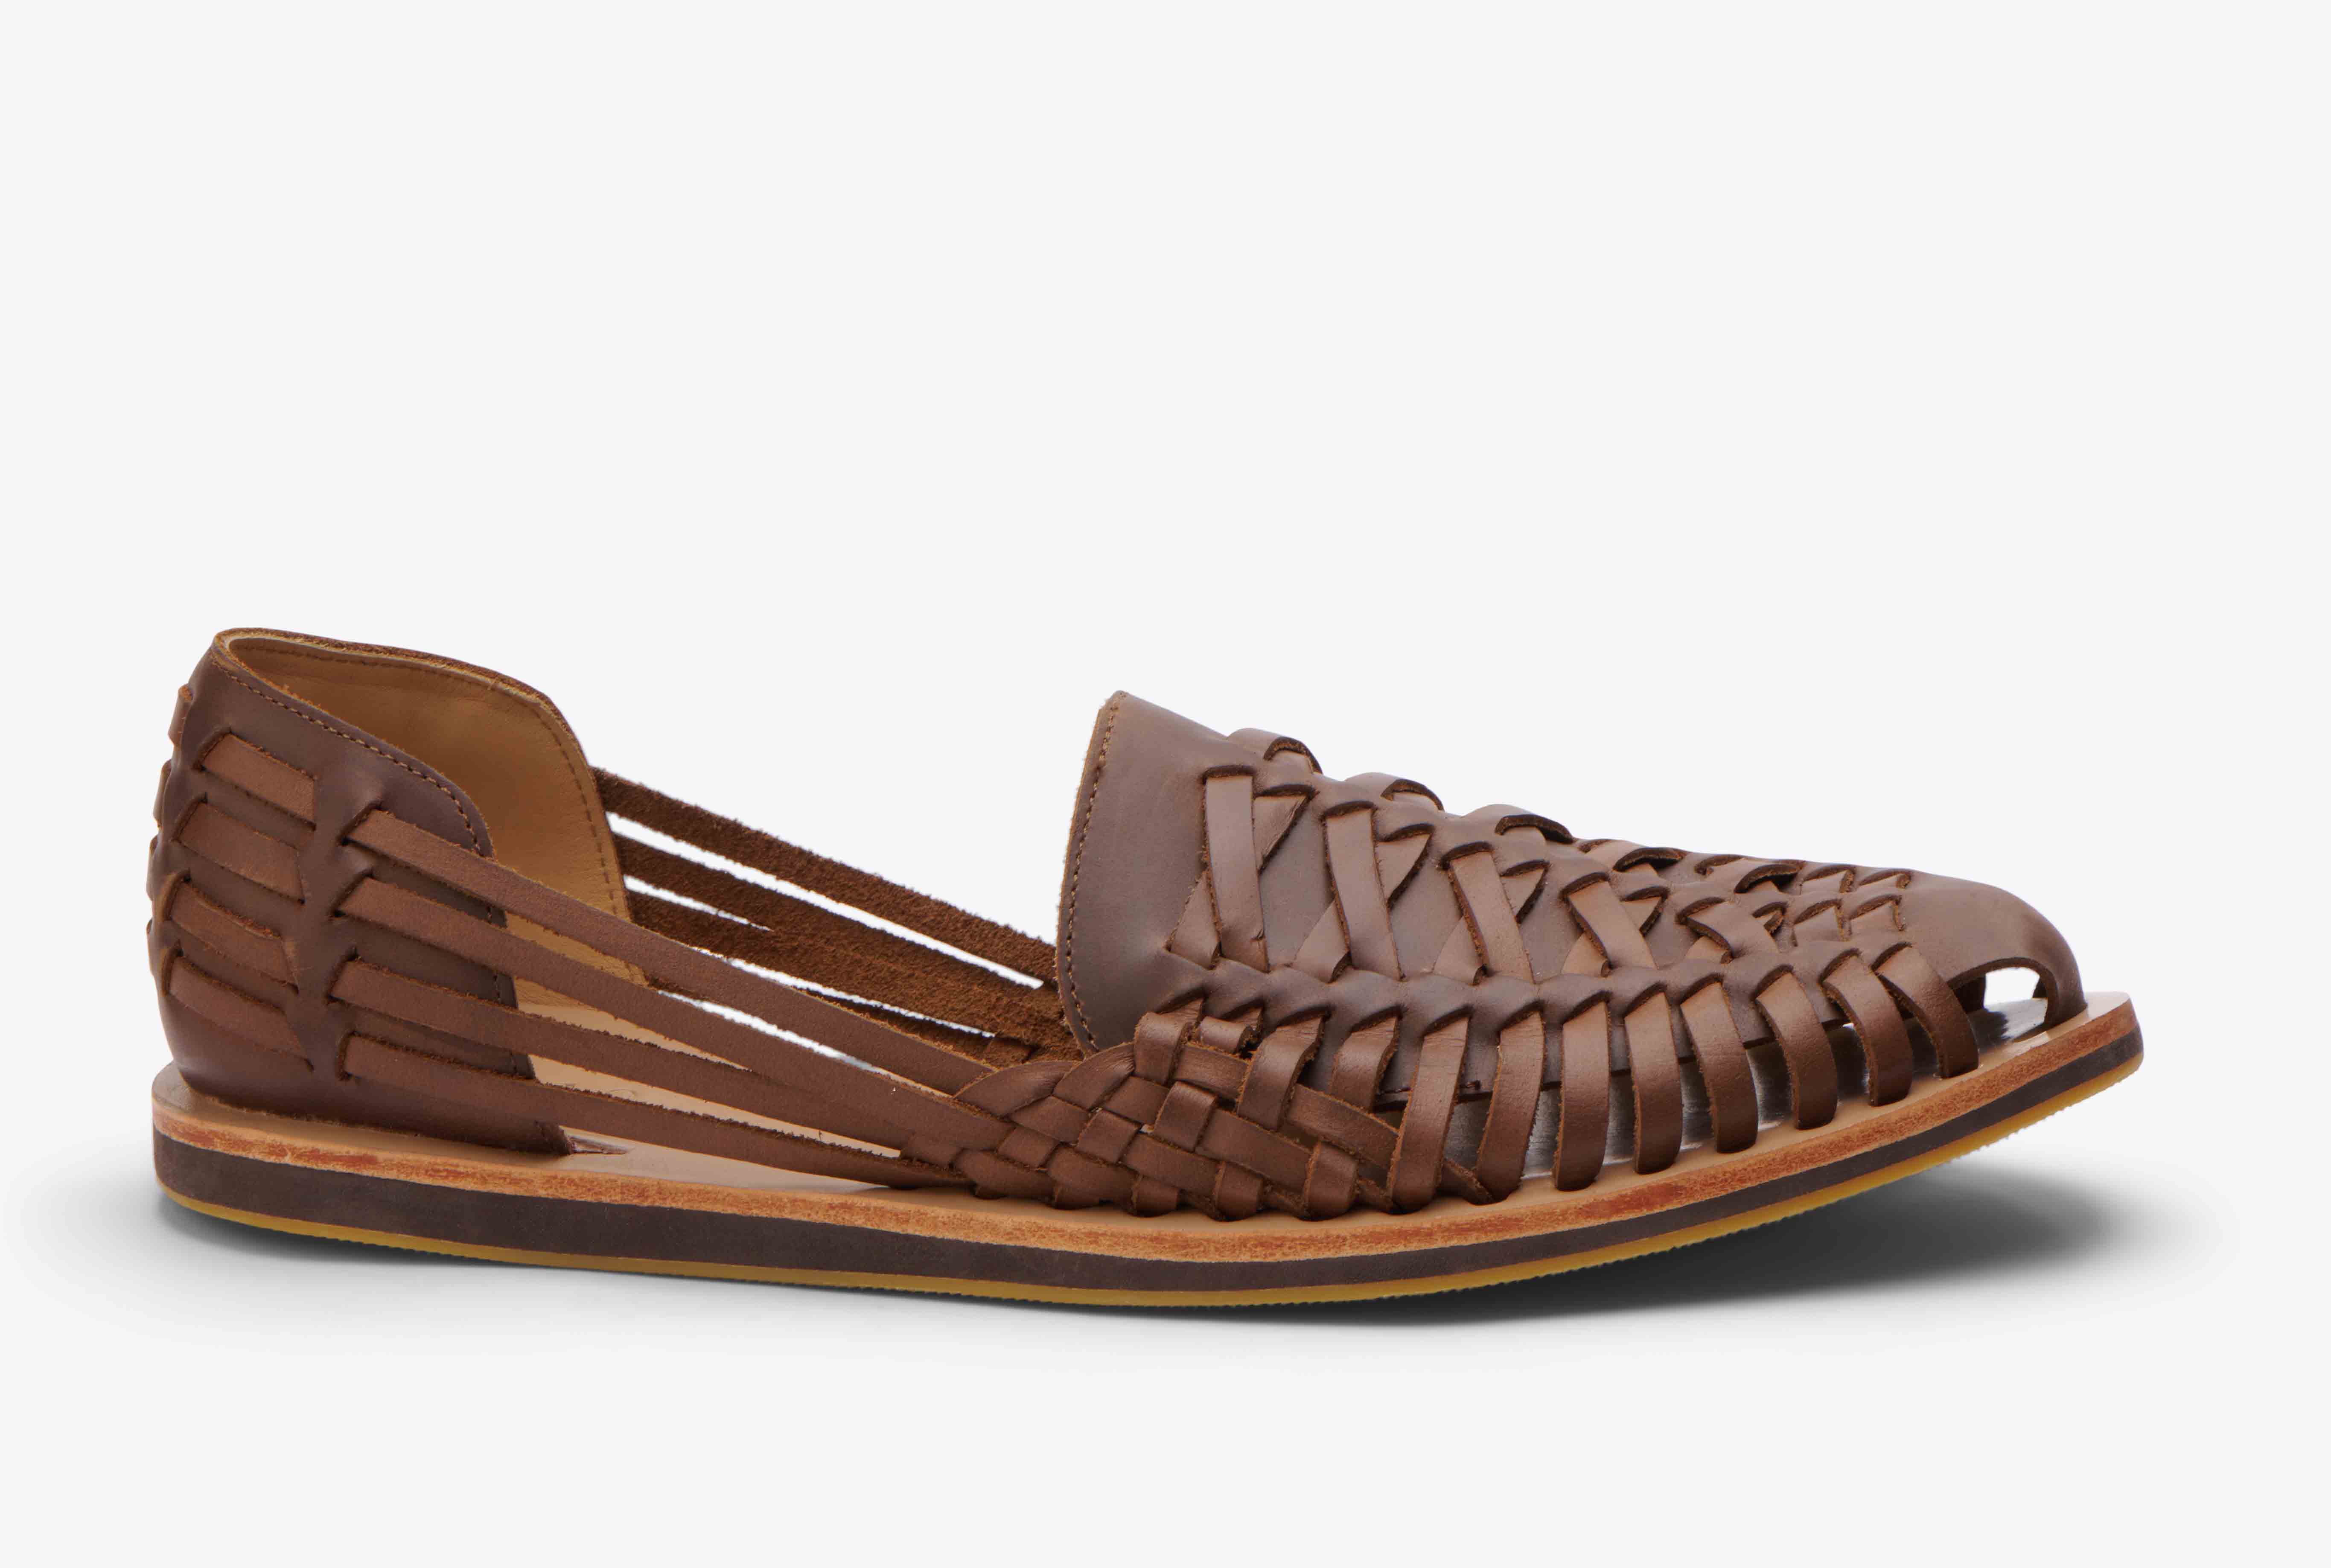 Nisolo Men's Huarache Sandal Brown - Every Nisolo product is built on the foundation of comfort, function, and design. 